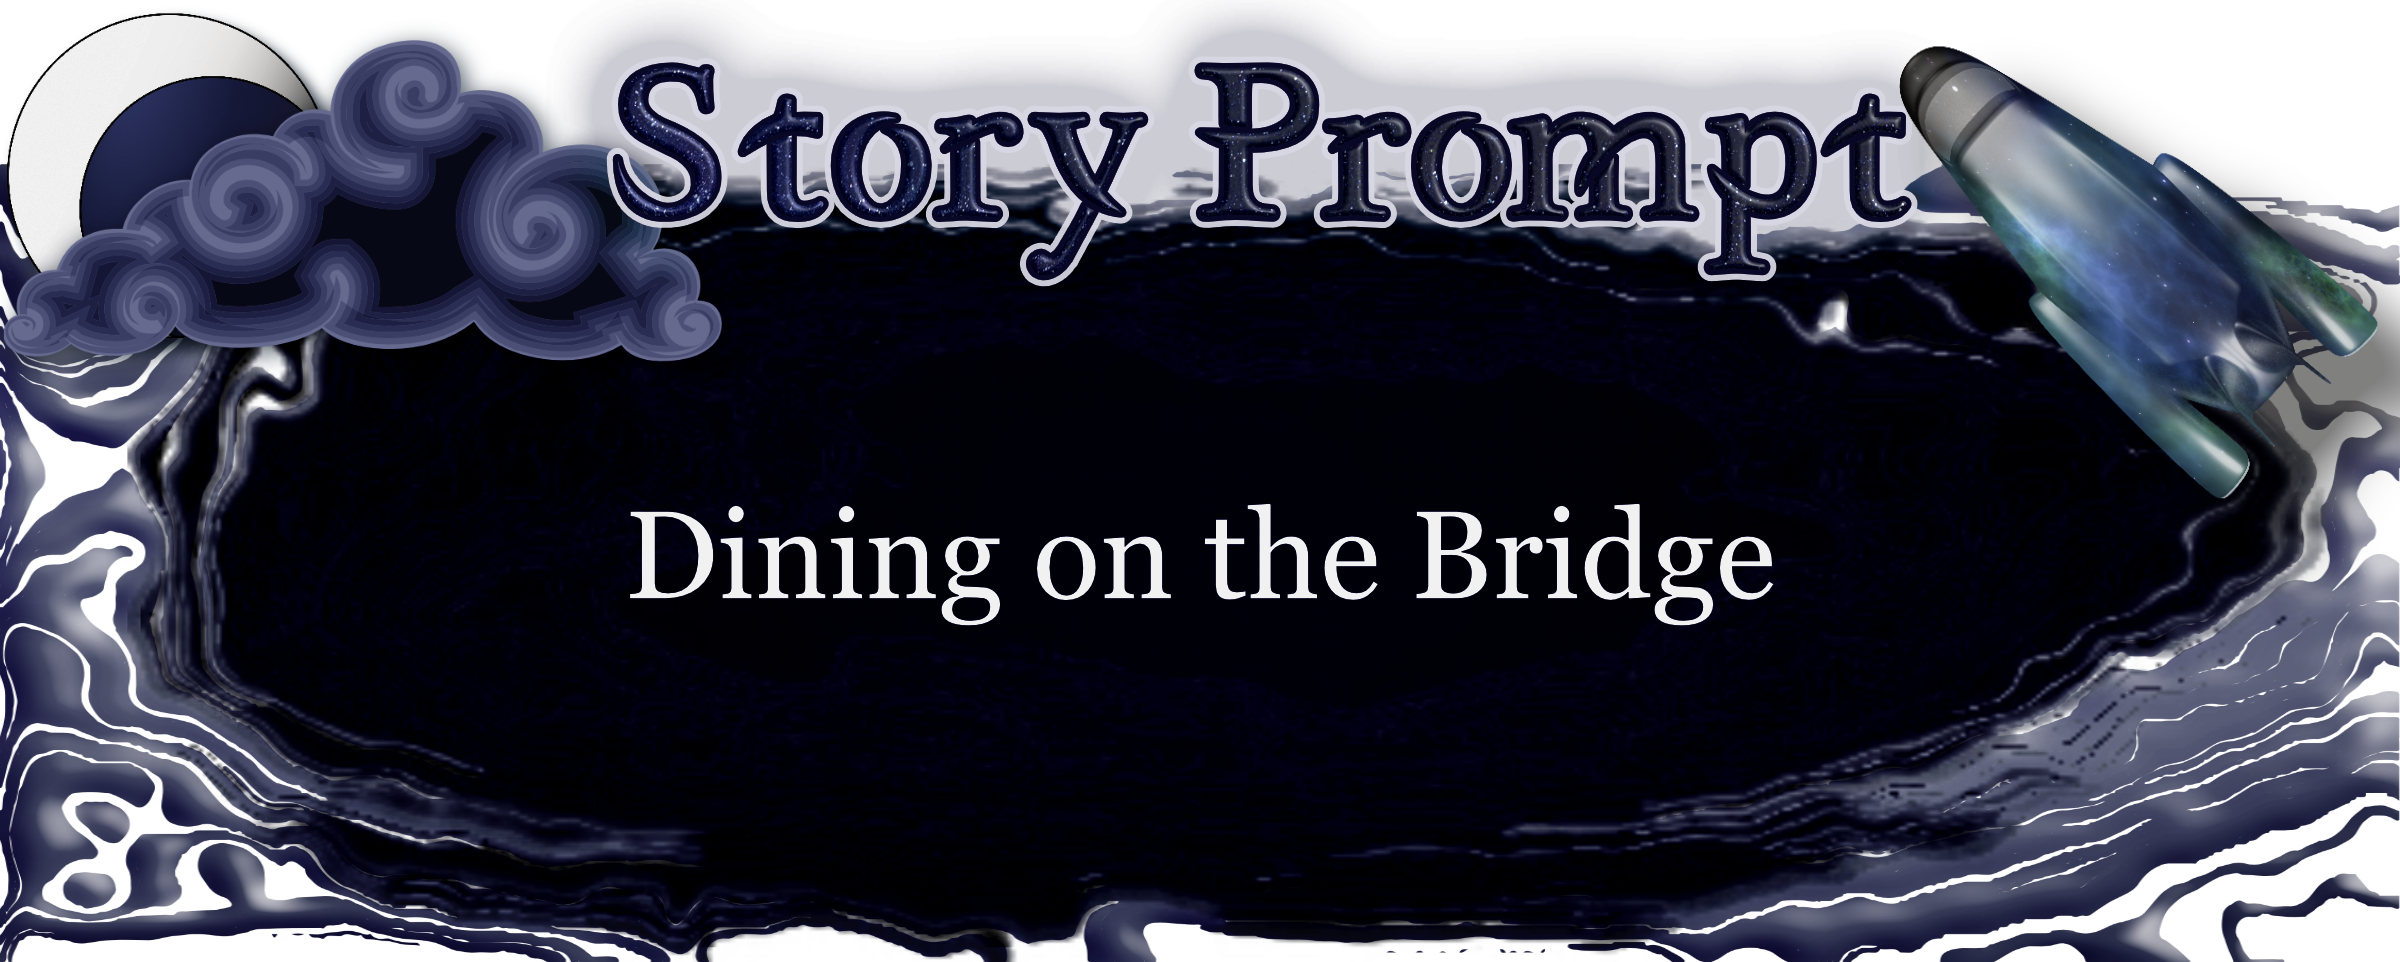 Author Jenna Eatough's Flash Fiction Story from writing prompt: Dining on the Bridge